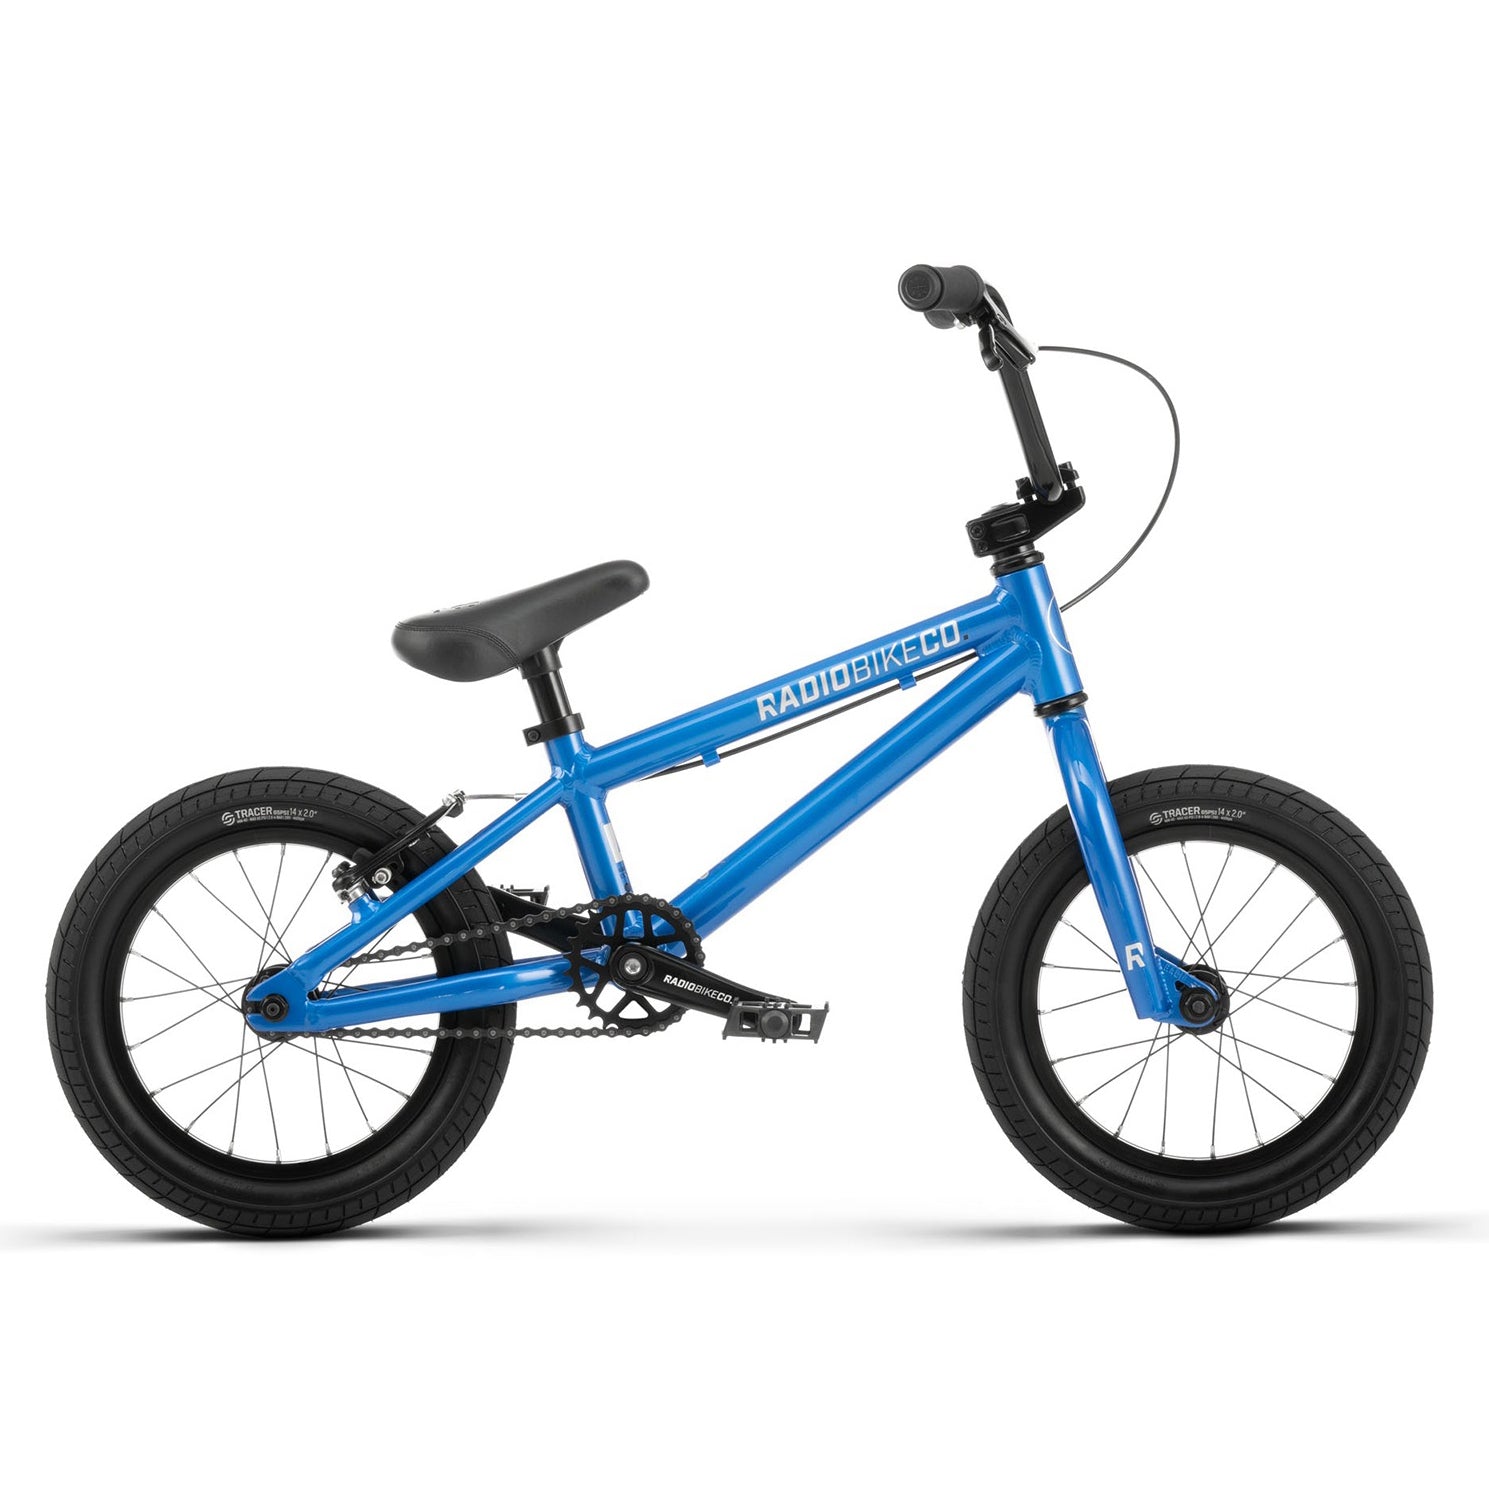 A blue BMX bike with black tires, straight handlebars, and "Radio Dice 14 Inch Bike" printed on the frame. The 14-inch lightweight kids bike is in a standing position.